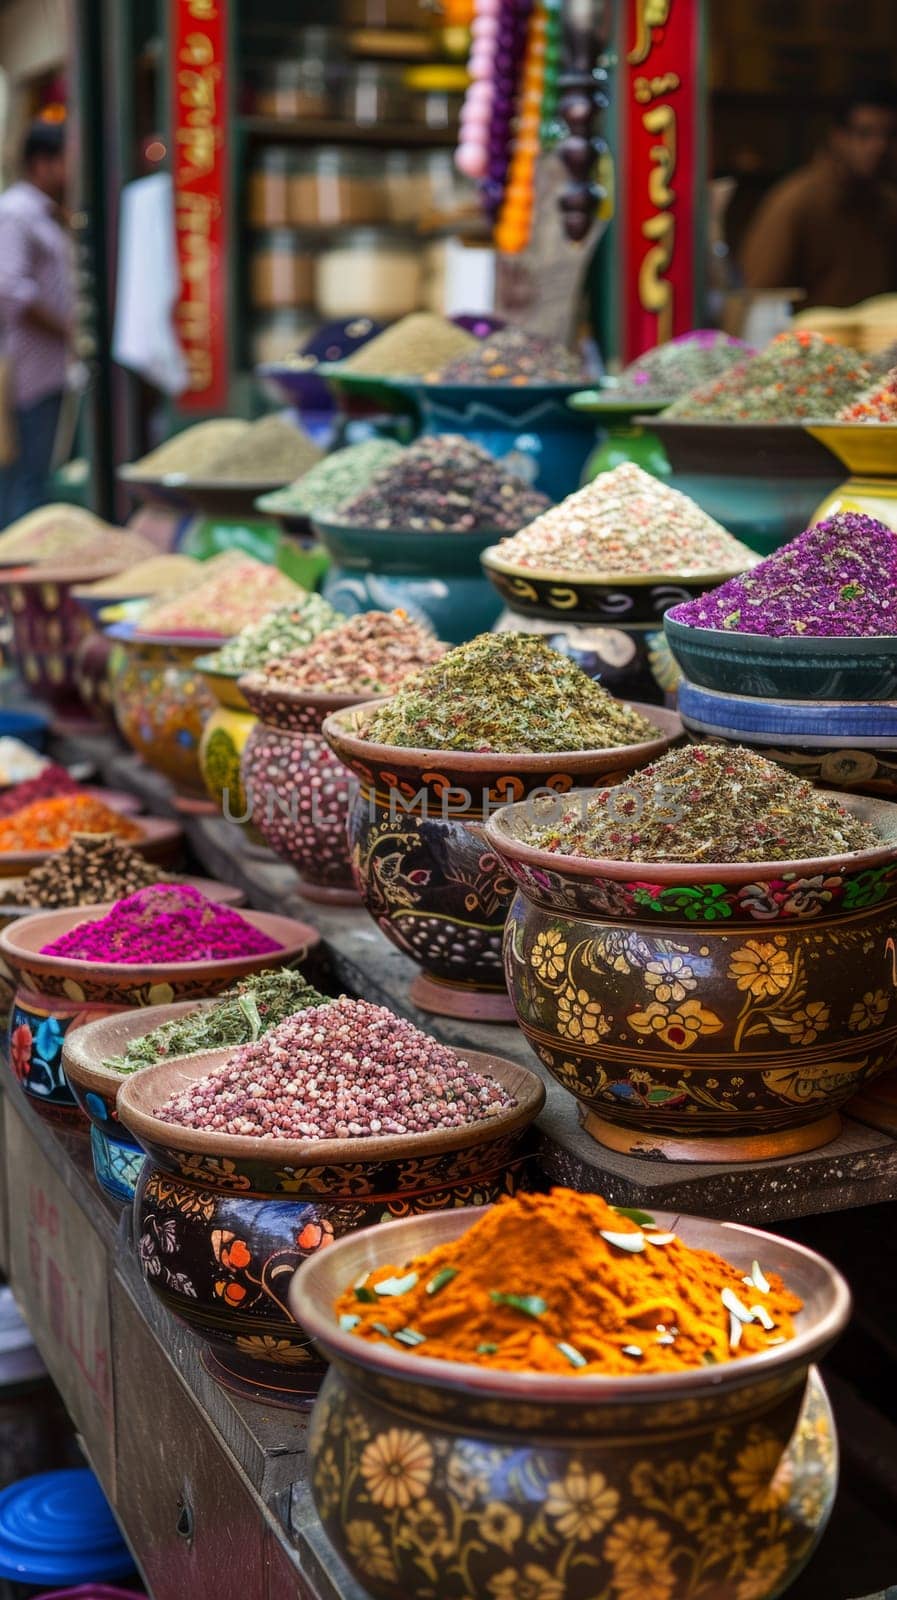 A display of a variety of bowls filled with different colored spices, AI by starush